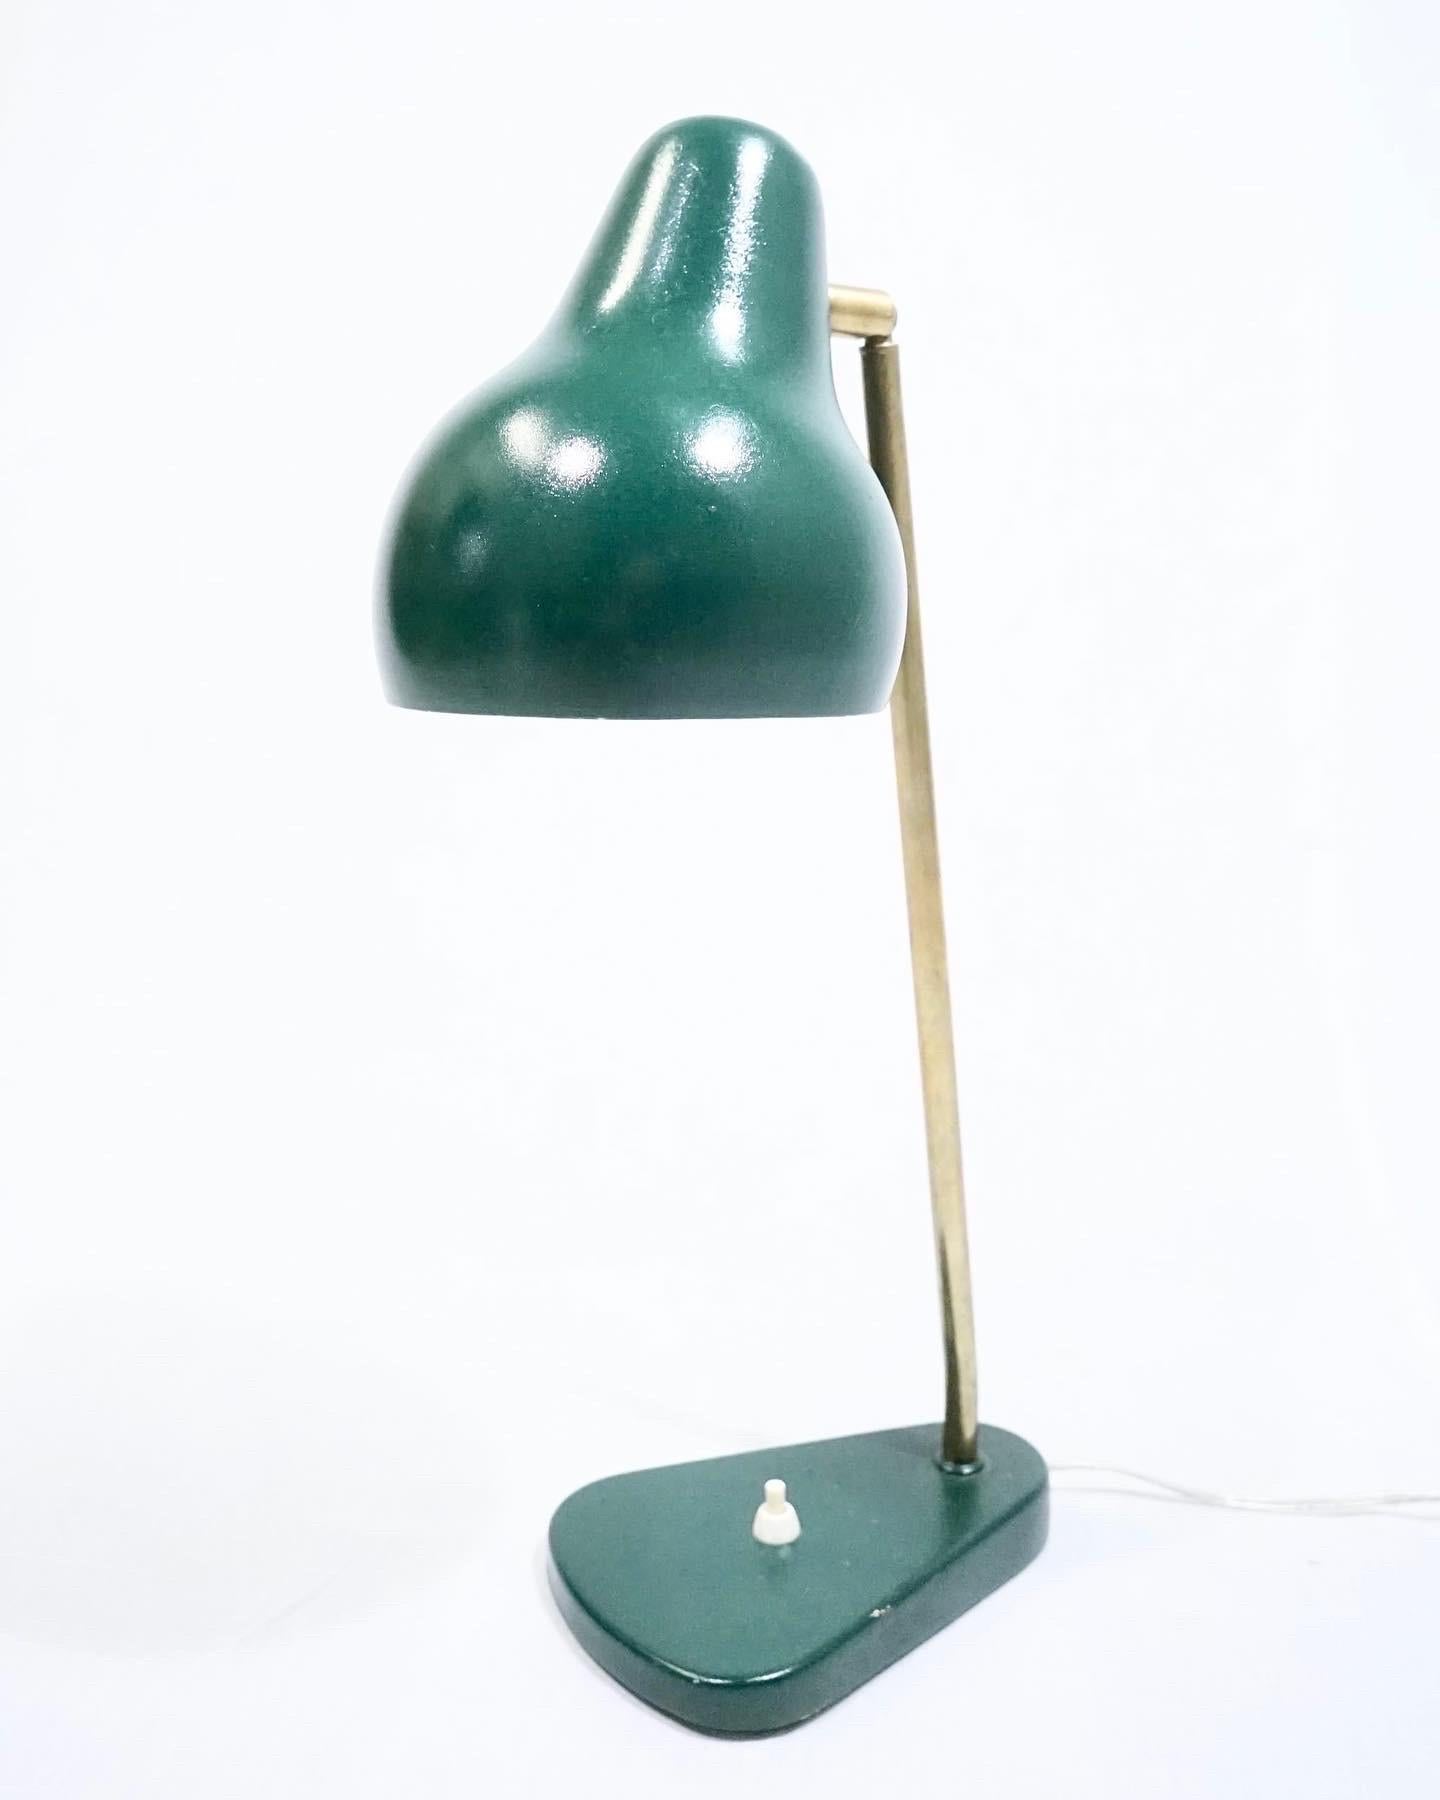 Rare original production Vilhelm Lauritzen VL38 table lamp produced by Louis Poulsen in the 1960’s, the lamp has later been lacquered green.
Vilhelm Lauritzen was a important part of the early danish modernist movement together with architects like